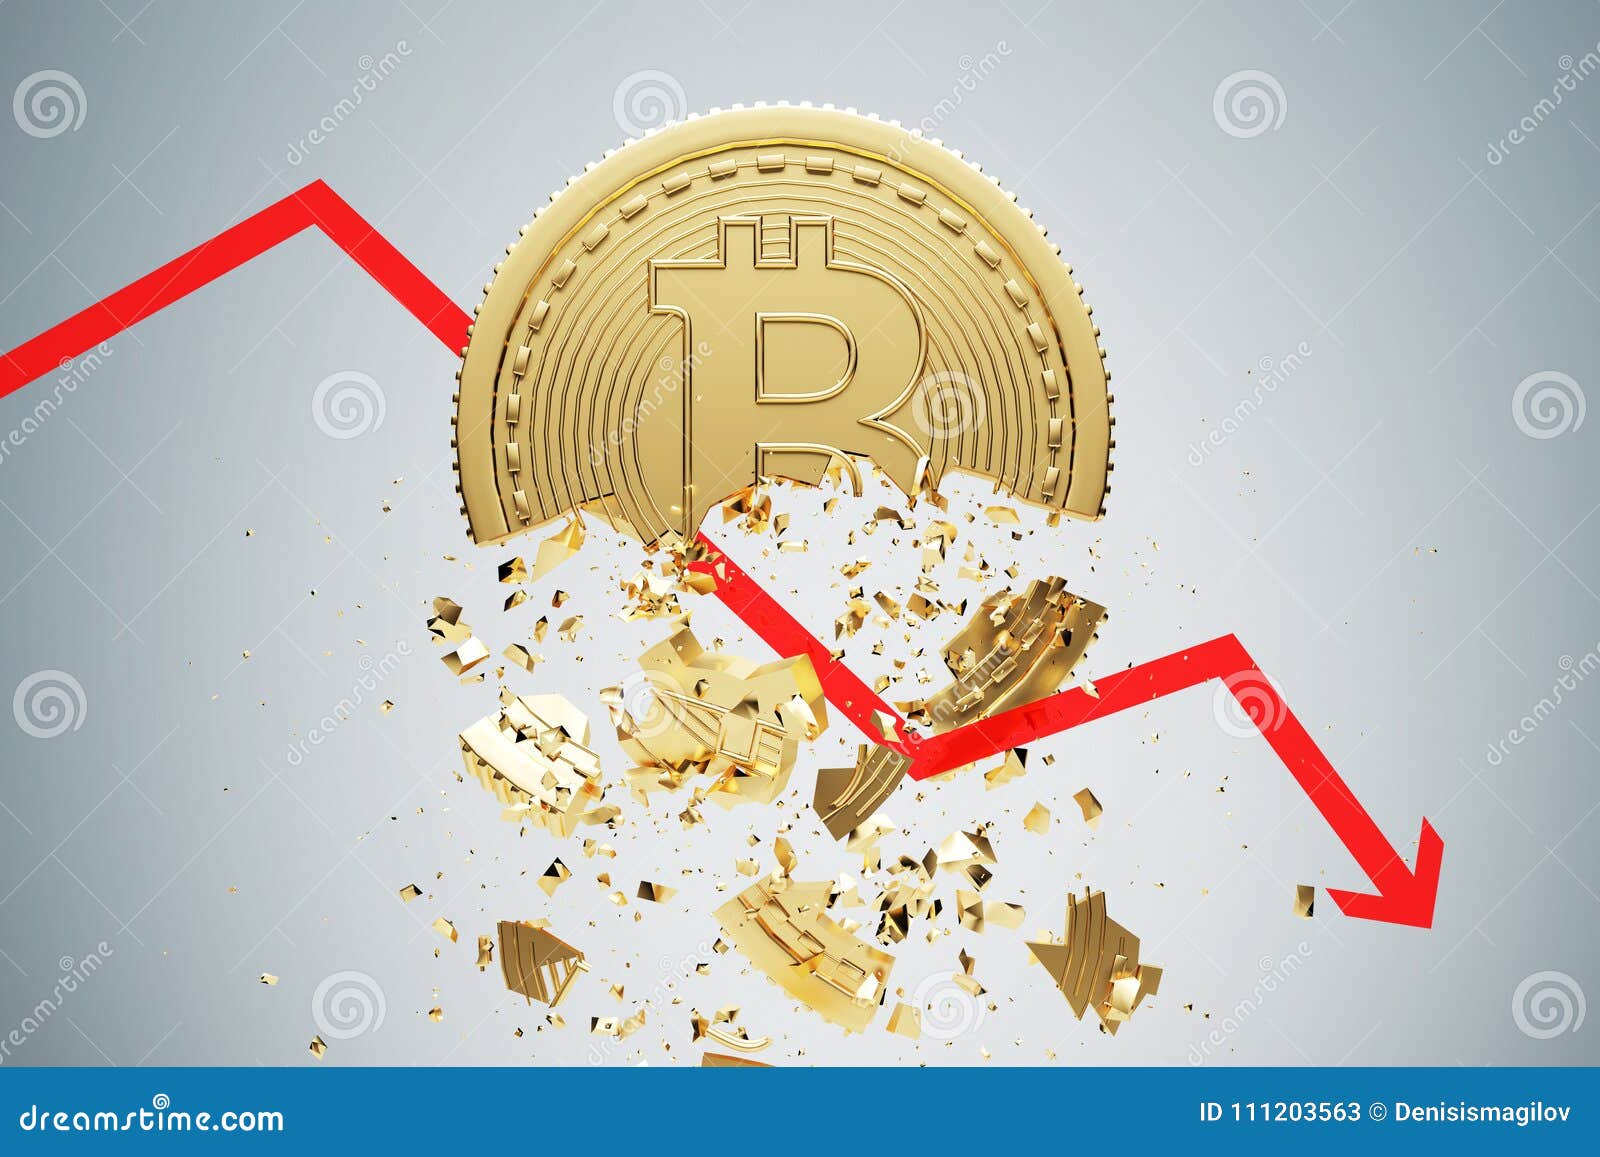 bitcoin will collapse